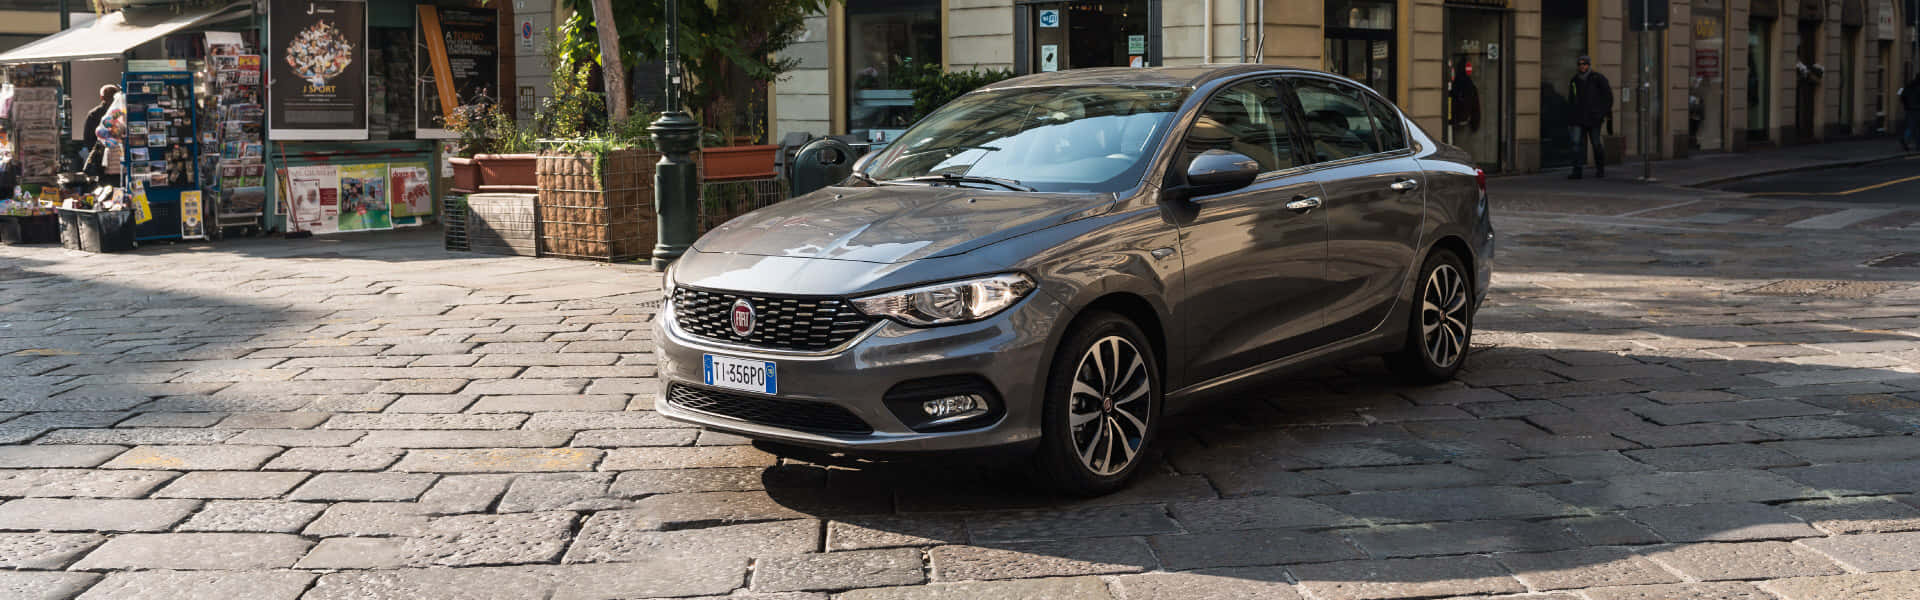 Stylish Fiat Tipo cruising through the city streets Wallpaper